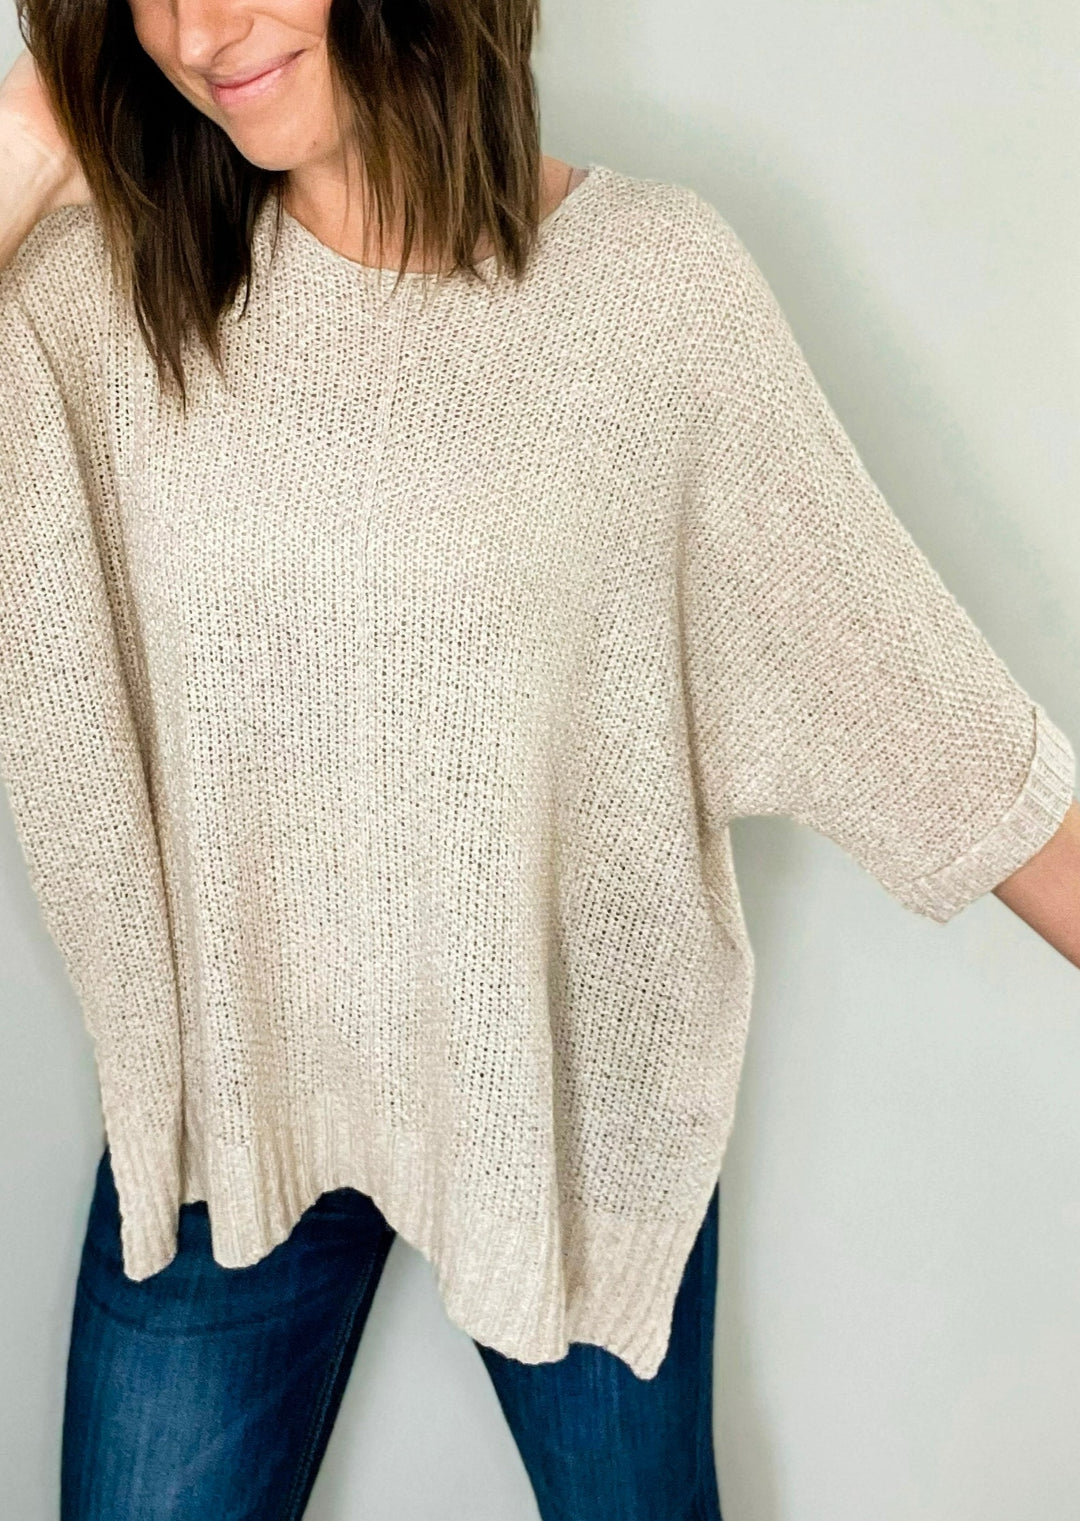 Light Tan Loose Fit Knitted Sweater | Women's Spring Sweaters